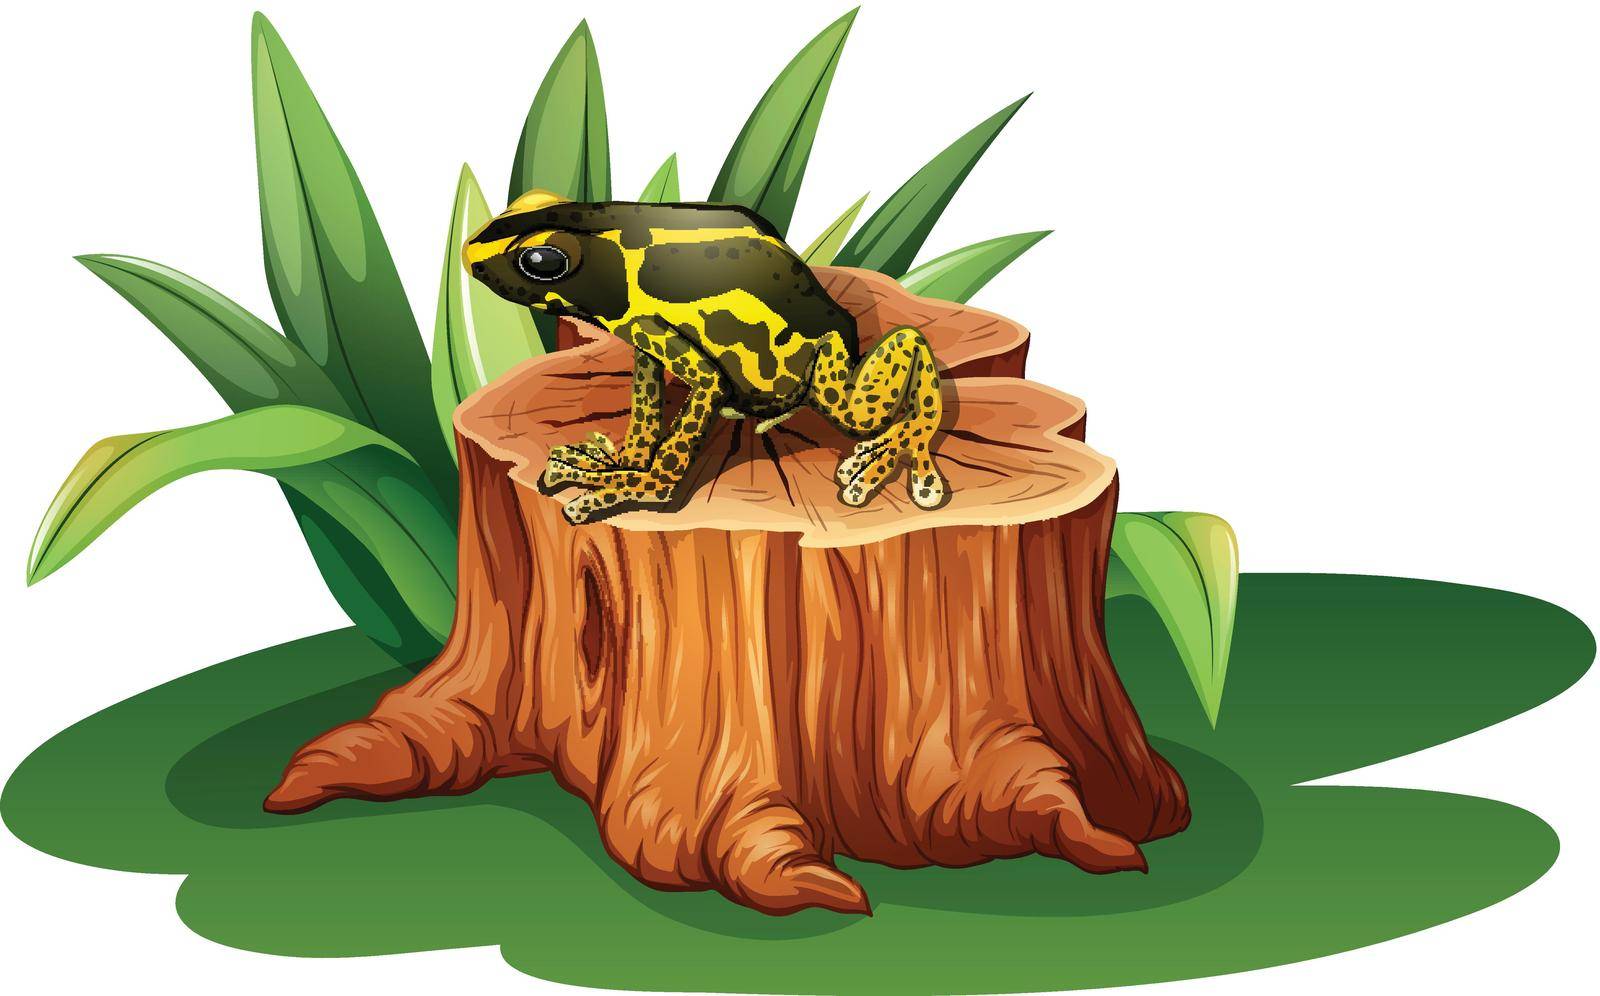 Illustration of a frog above the stump on a white background